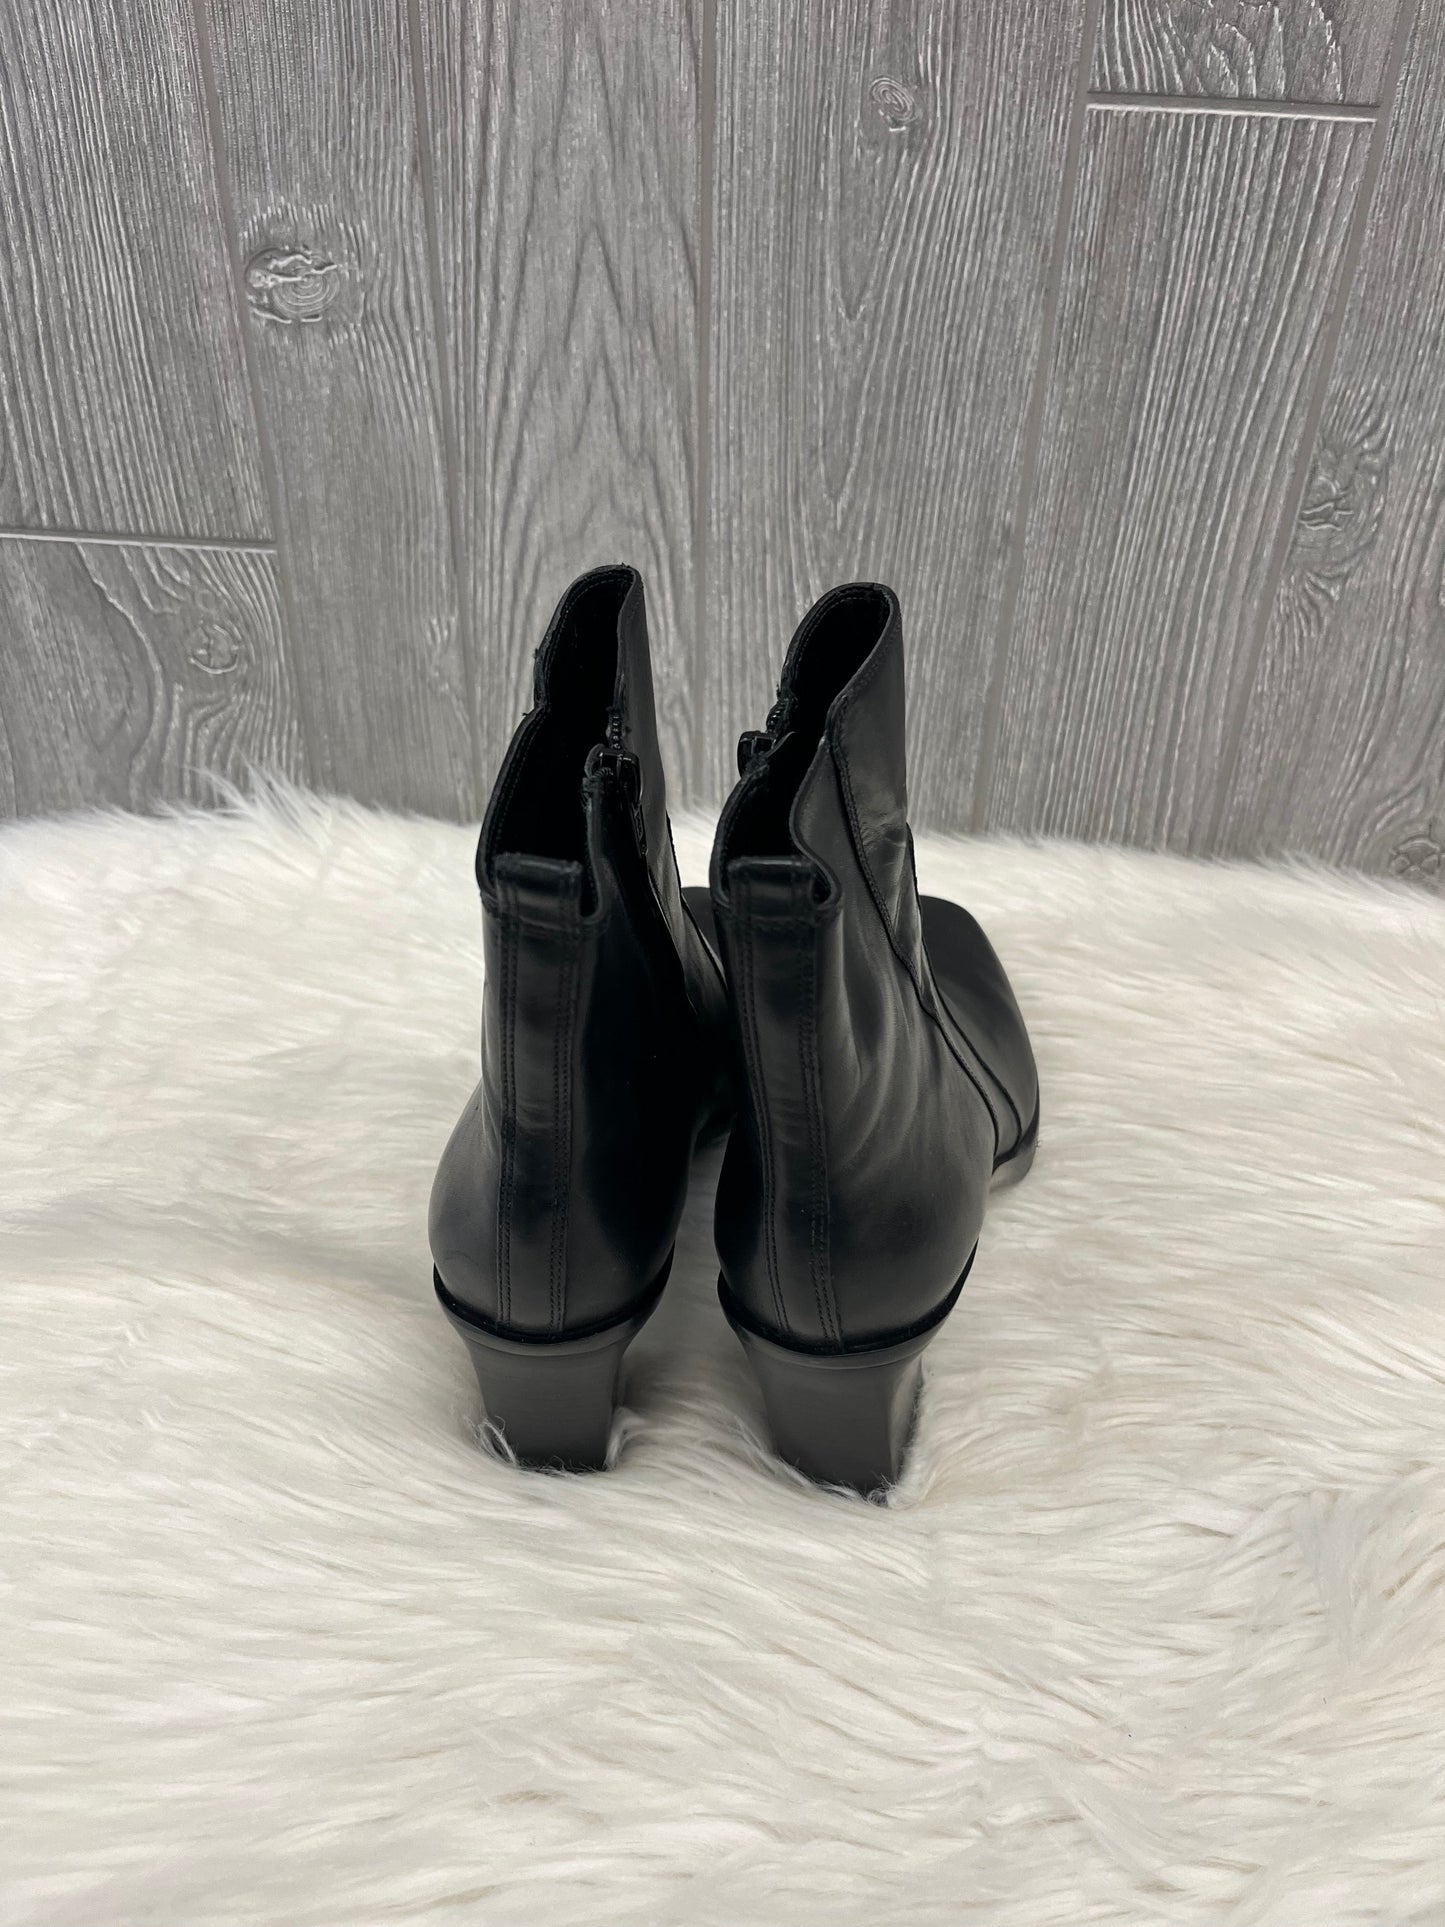 Boots Ankle Heels By Antonio Melani  Size: 8.5